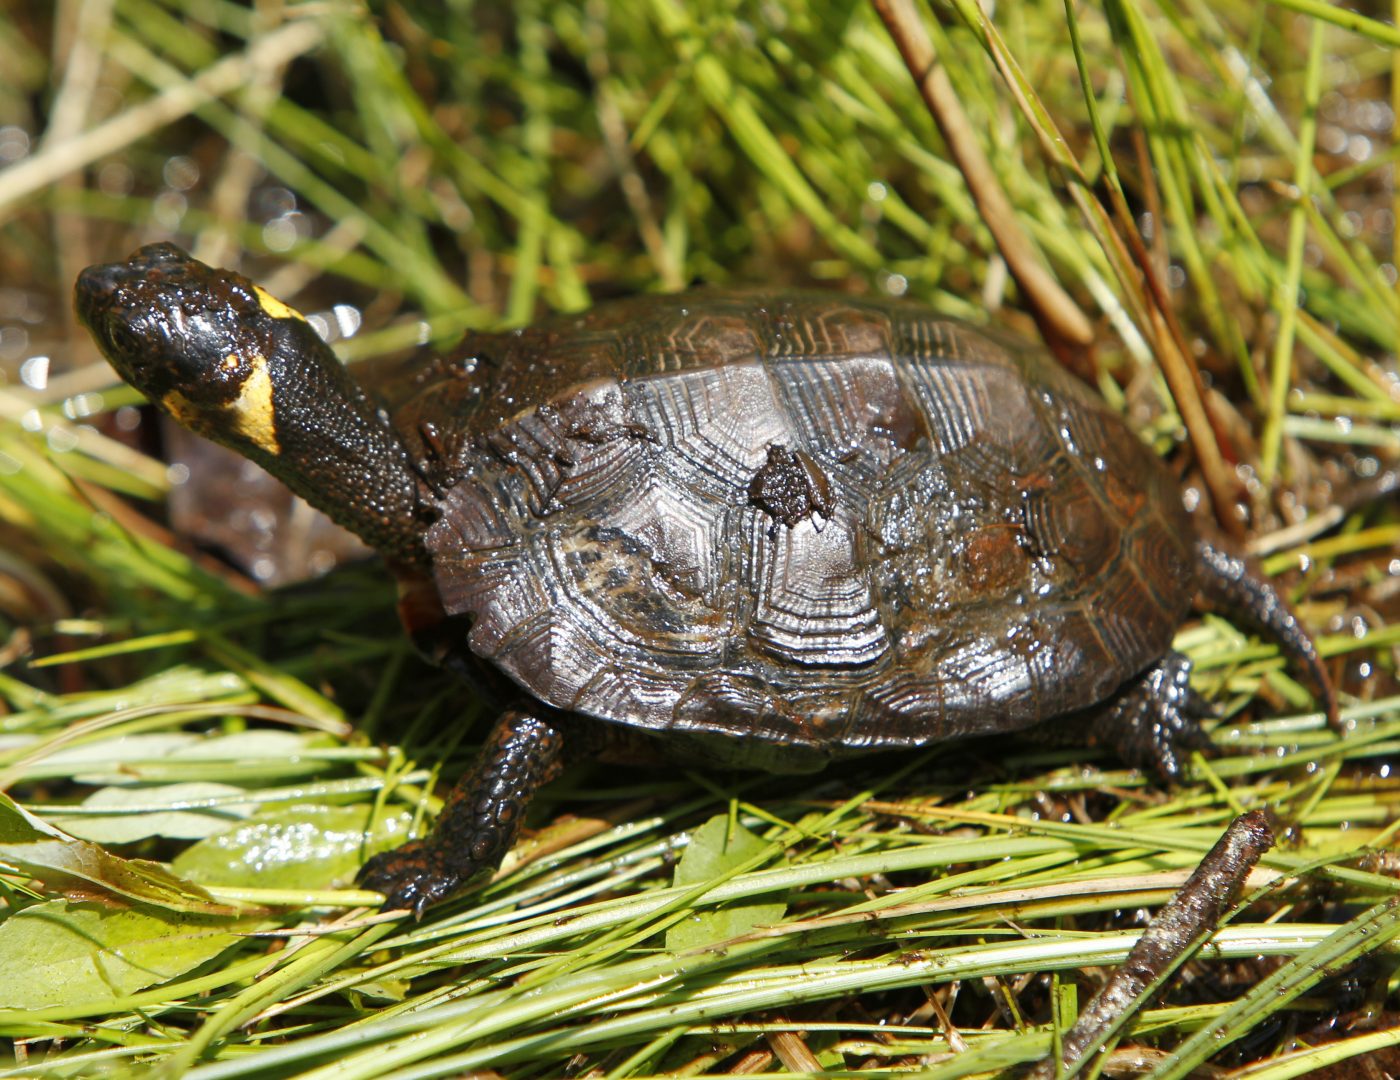 Bog turtles, a federally listed endangered species, hibernate during the winter. Construction that would disturb their habitat must be conducted before March 31.